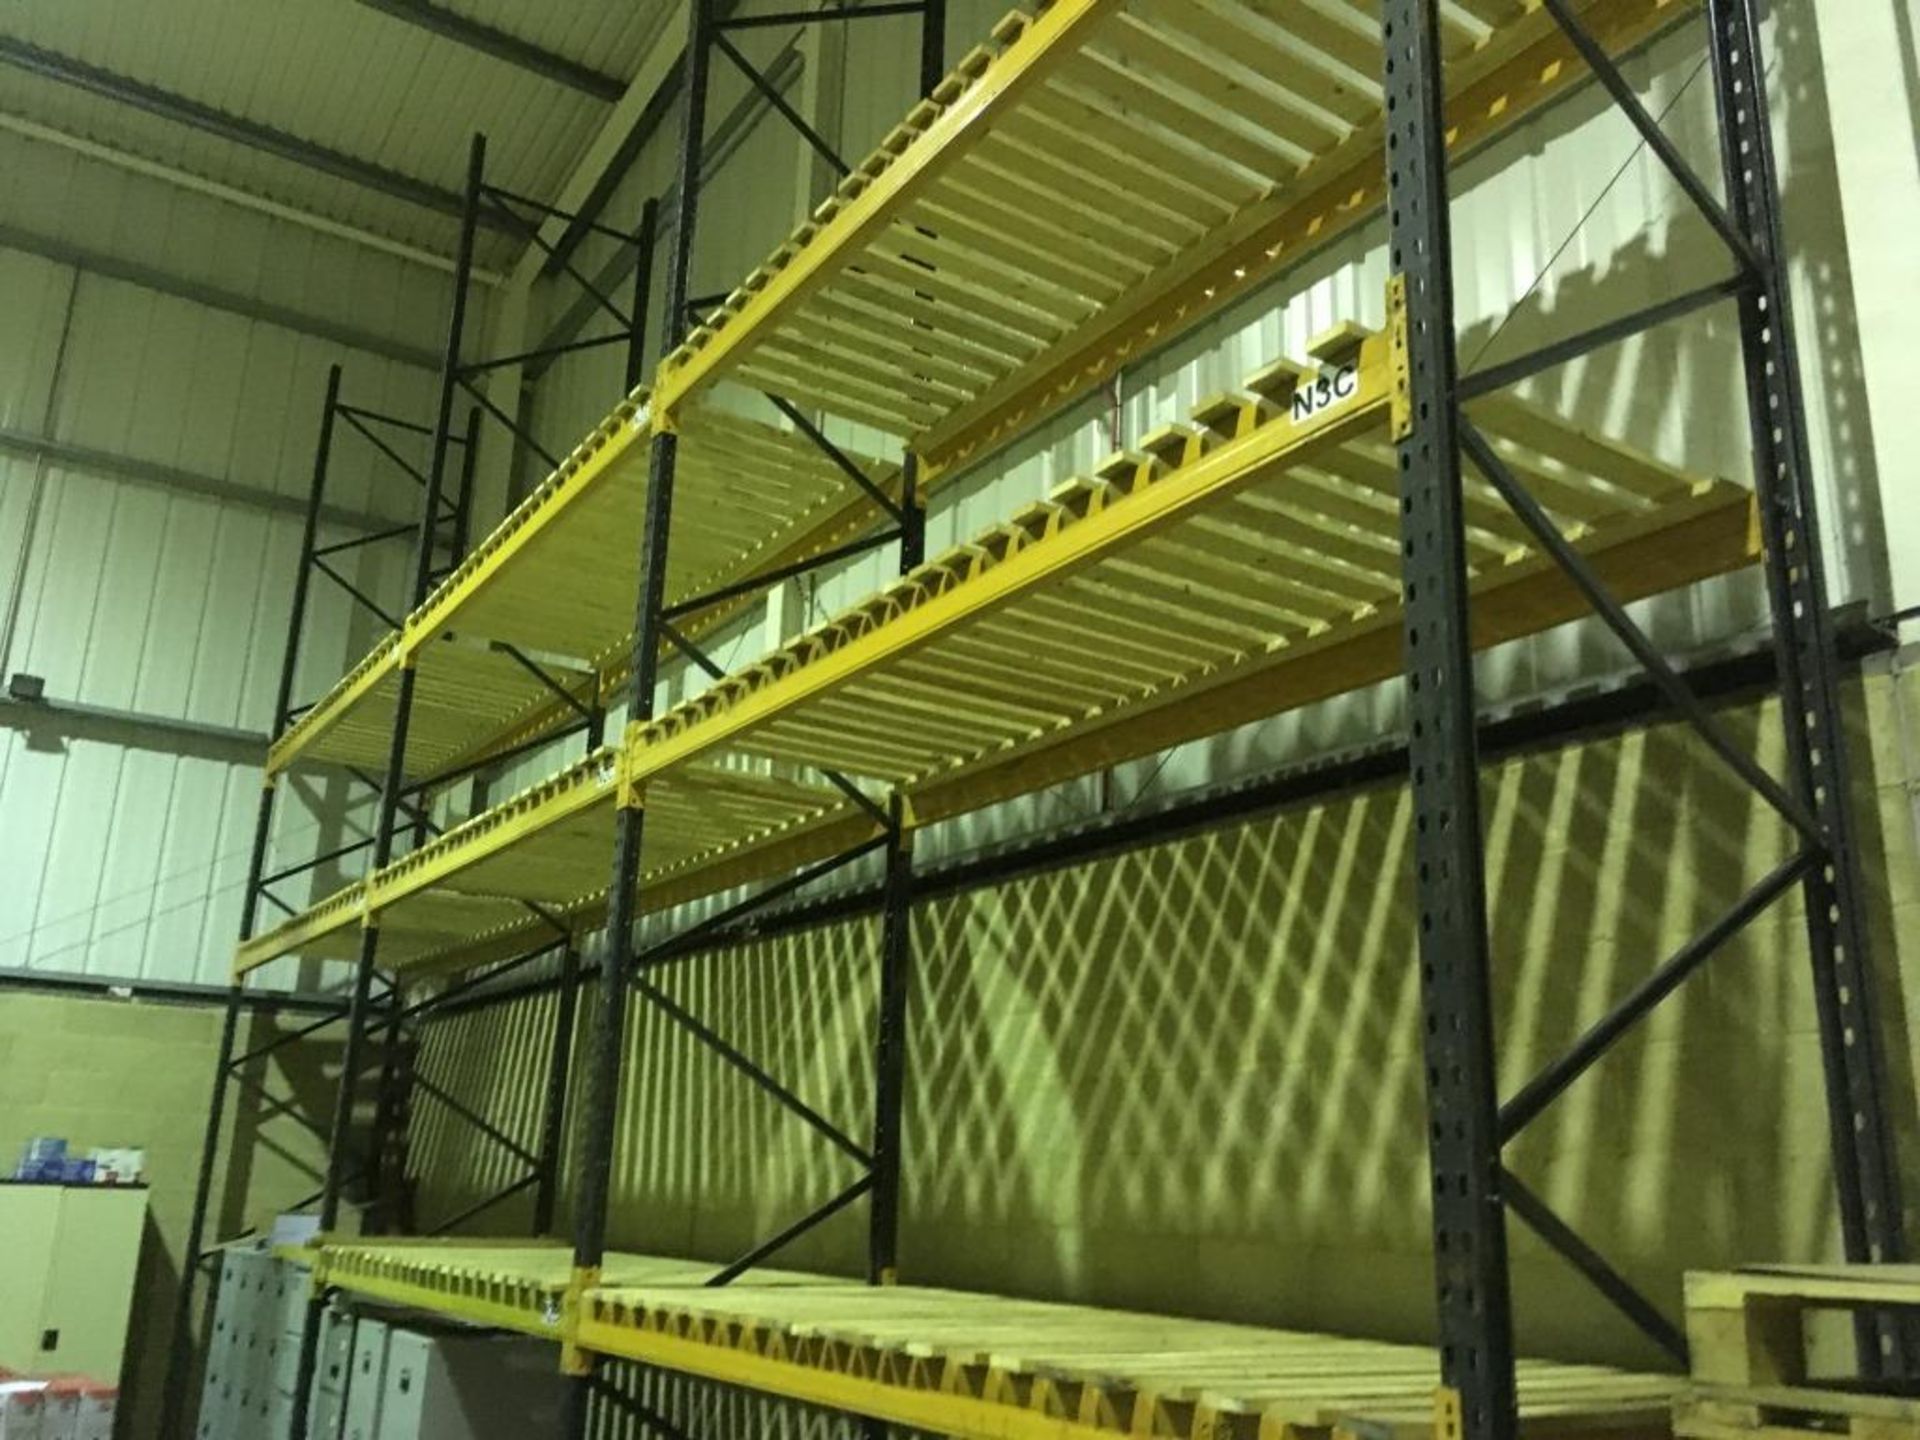 15 bays of boltless racking comprising 20 vertical frames measuring 7.5m tall and 1.1m deep and 86 - Bild 6 aus 6